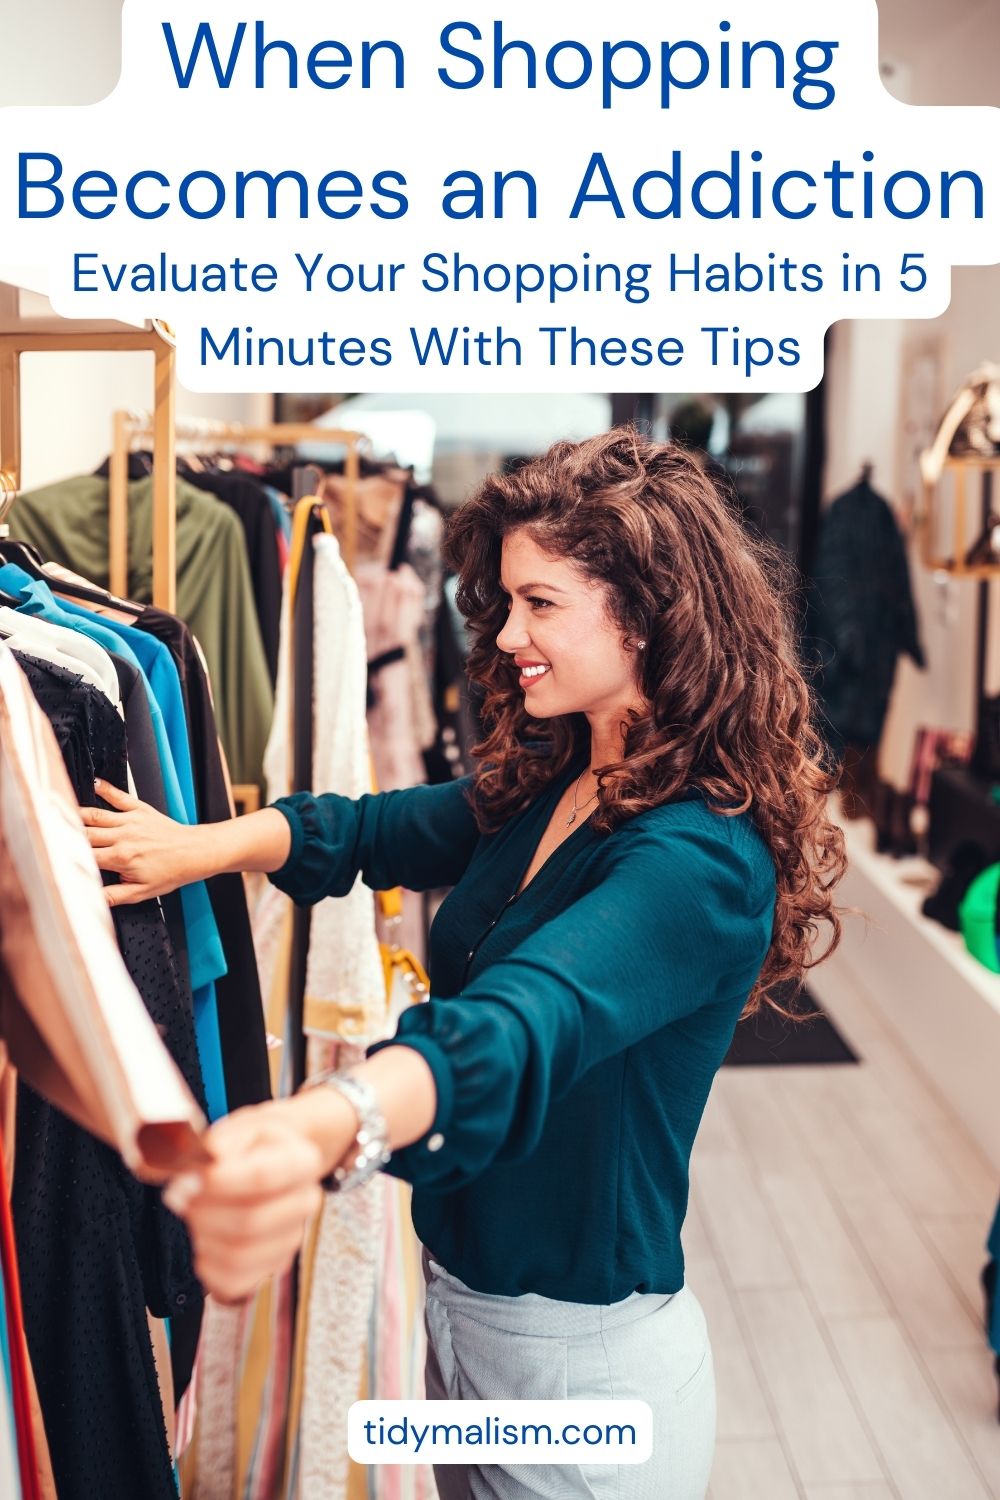 The Habitual Shopper: Why Does Spending Money Feel Good?